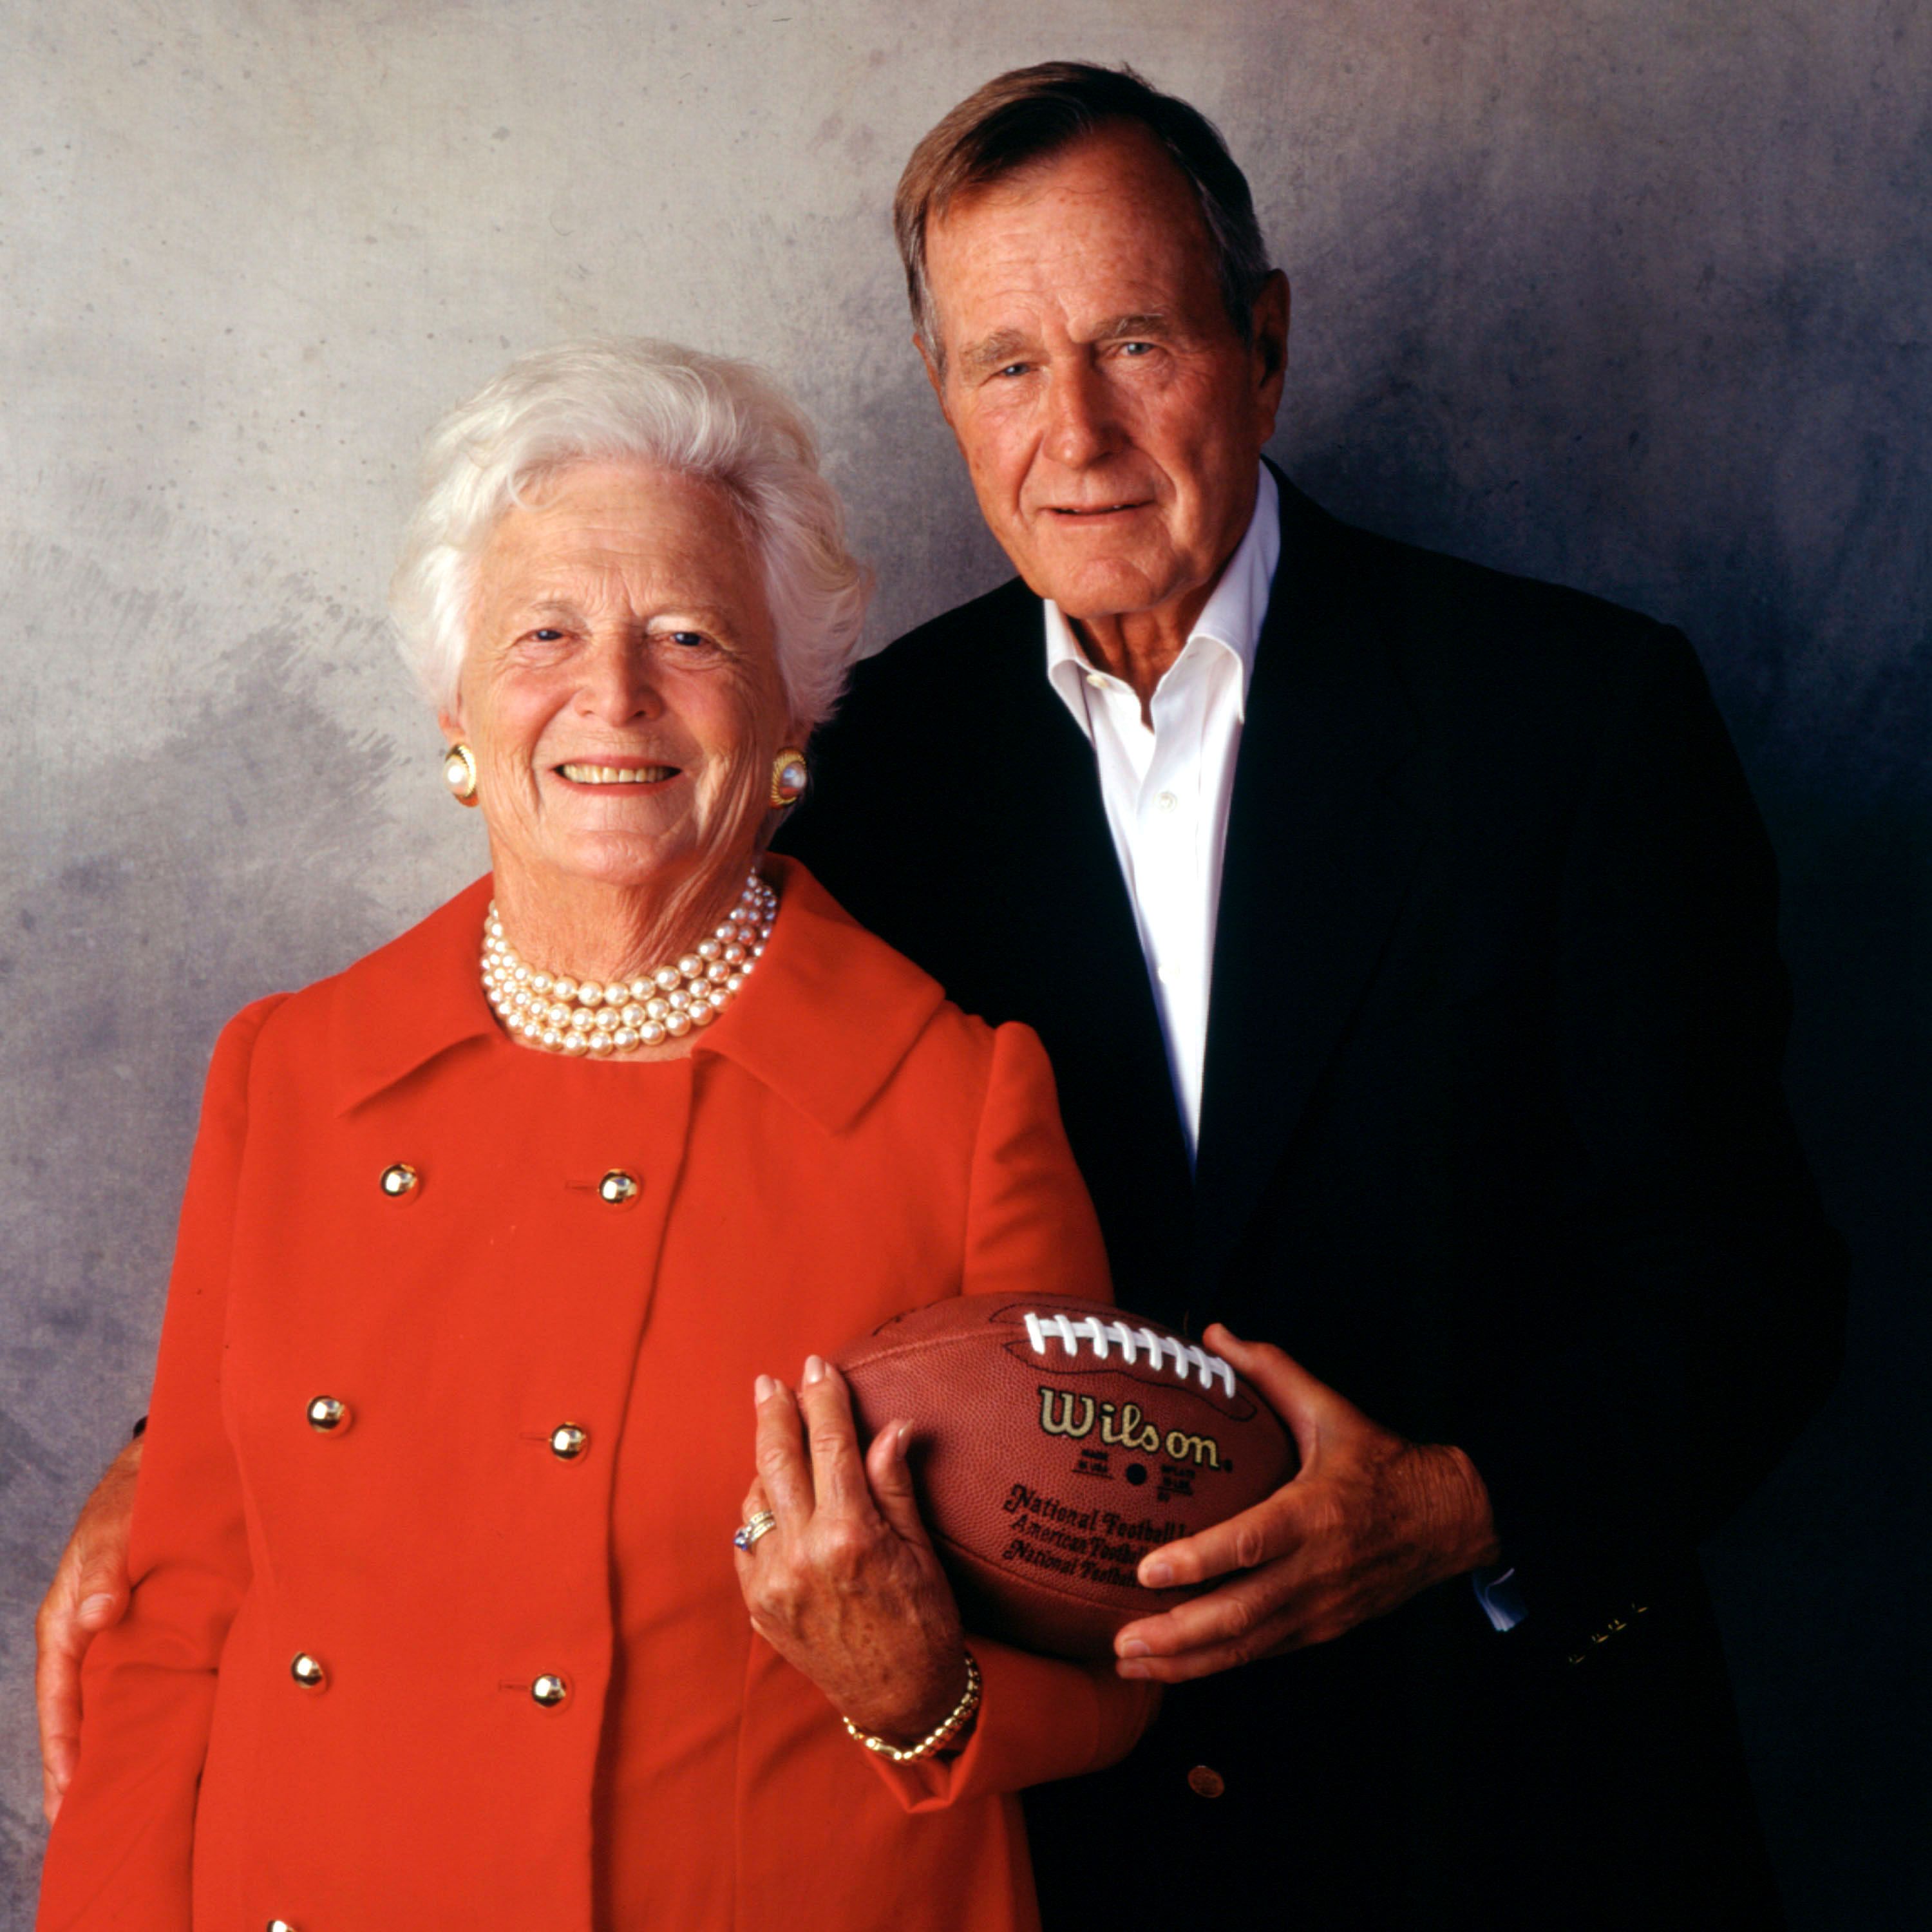 Former President George Bush and Barbara Bush photographed on August 23, 2001, in Houston, Texas. | Source: Pam Francis/Getty Images